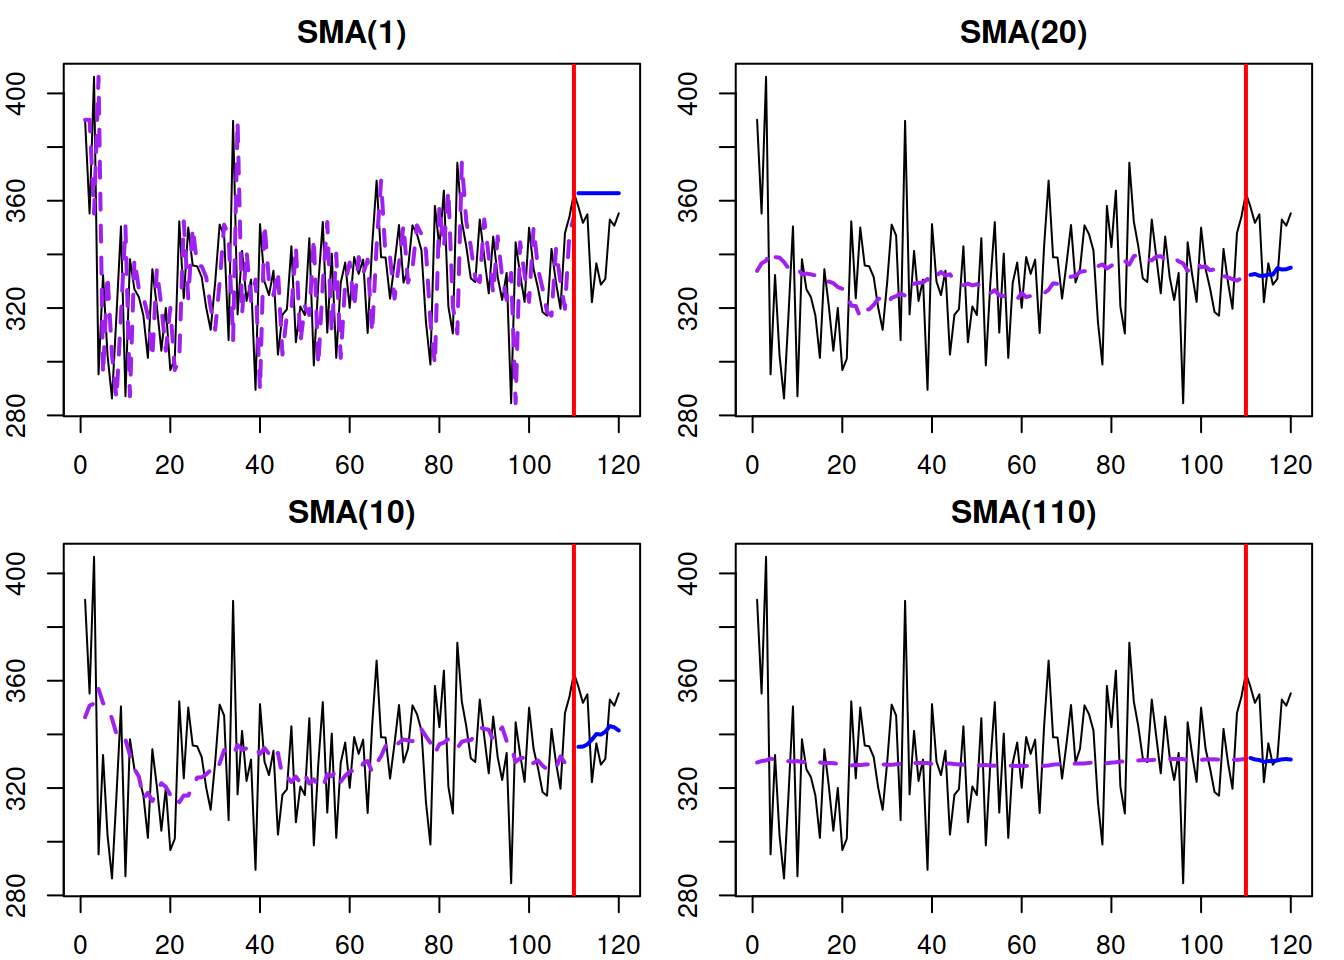 Examples of SMA time series and several SMA models of different orders applied to it.